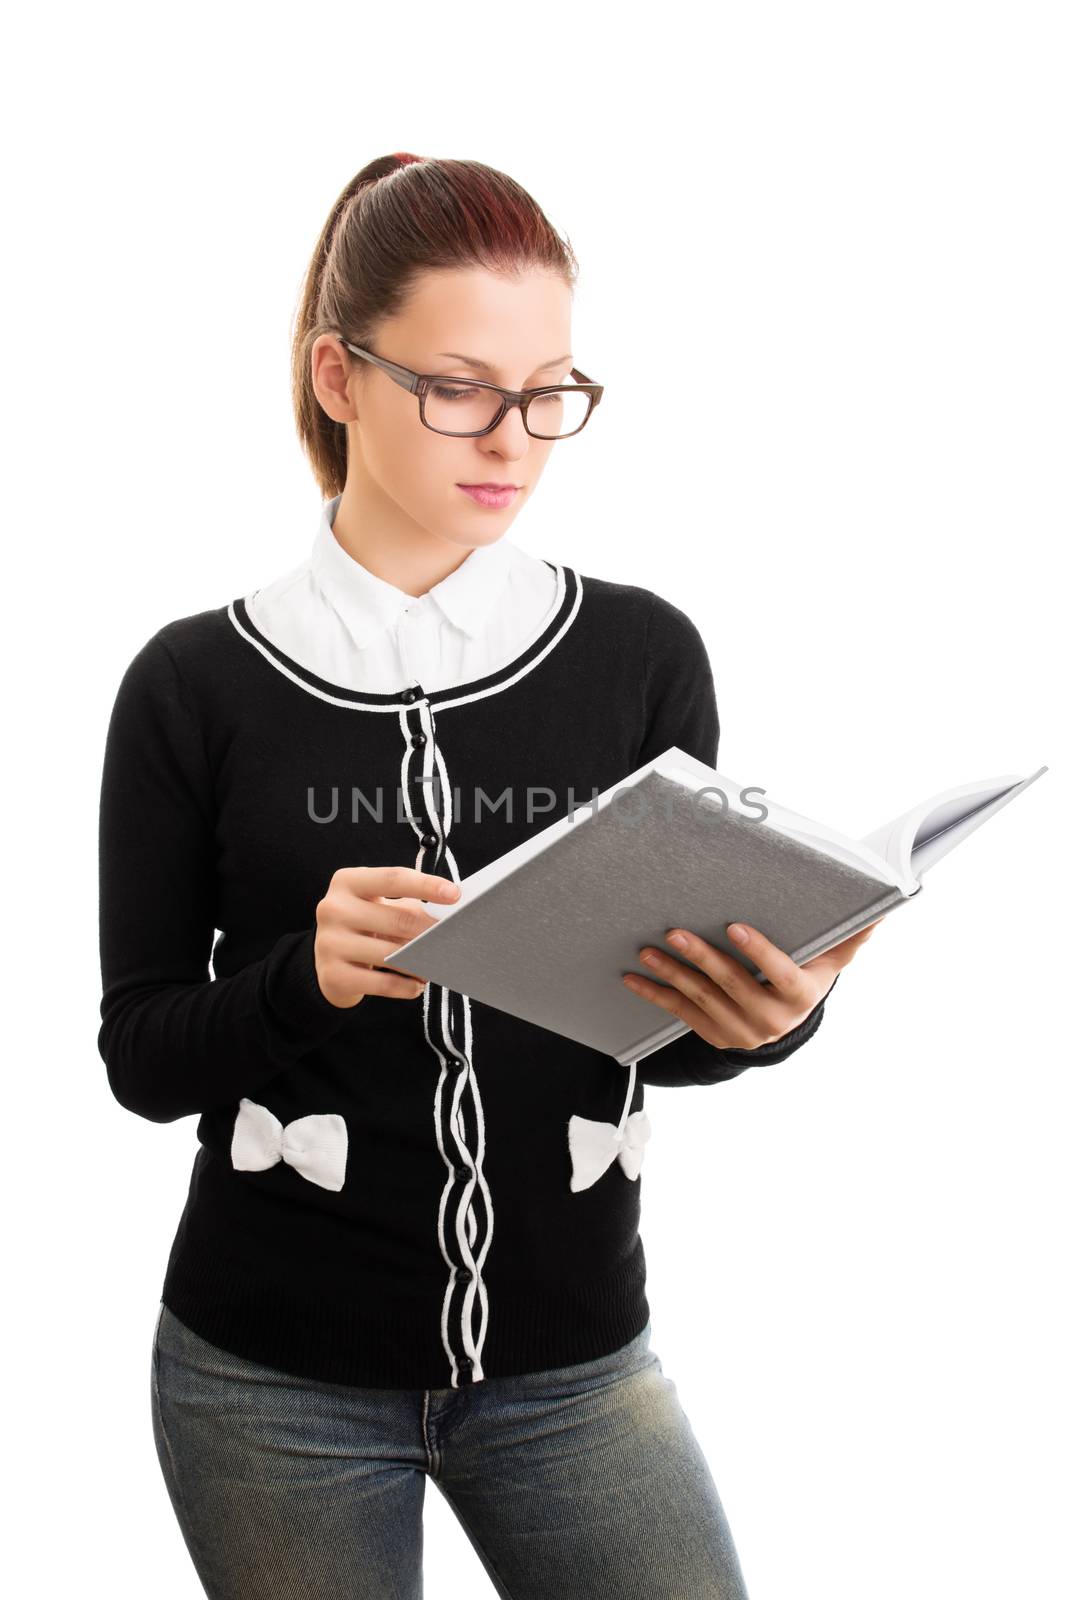 Reviewing notes. Reading something. Beautiful young student girl with glasses looking at an open notebook, isolated on white background.